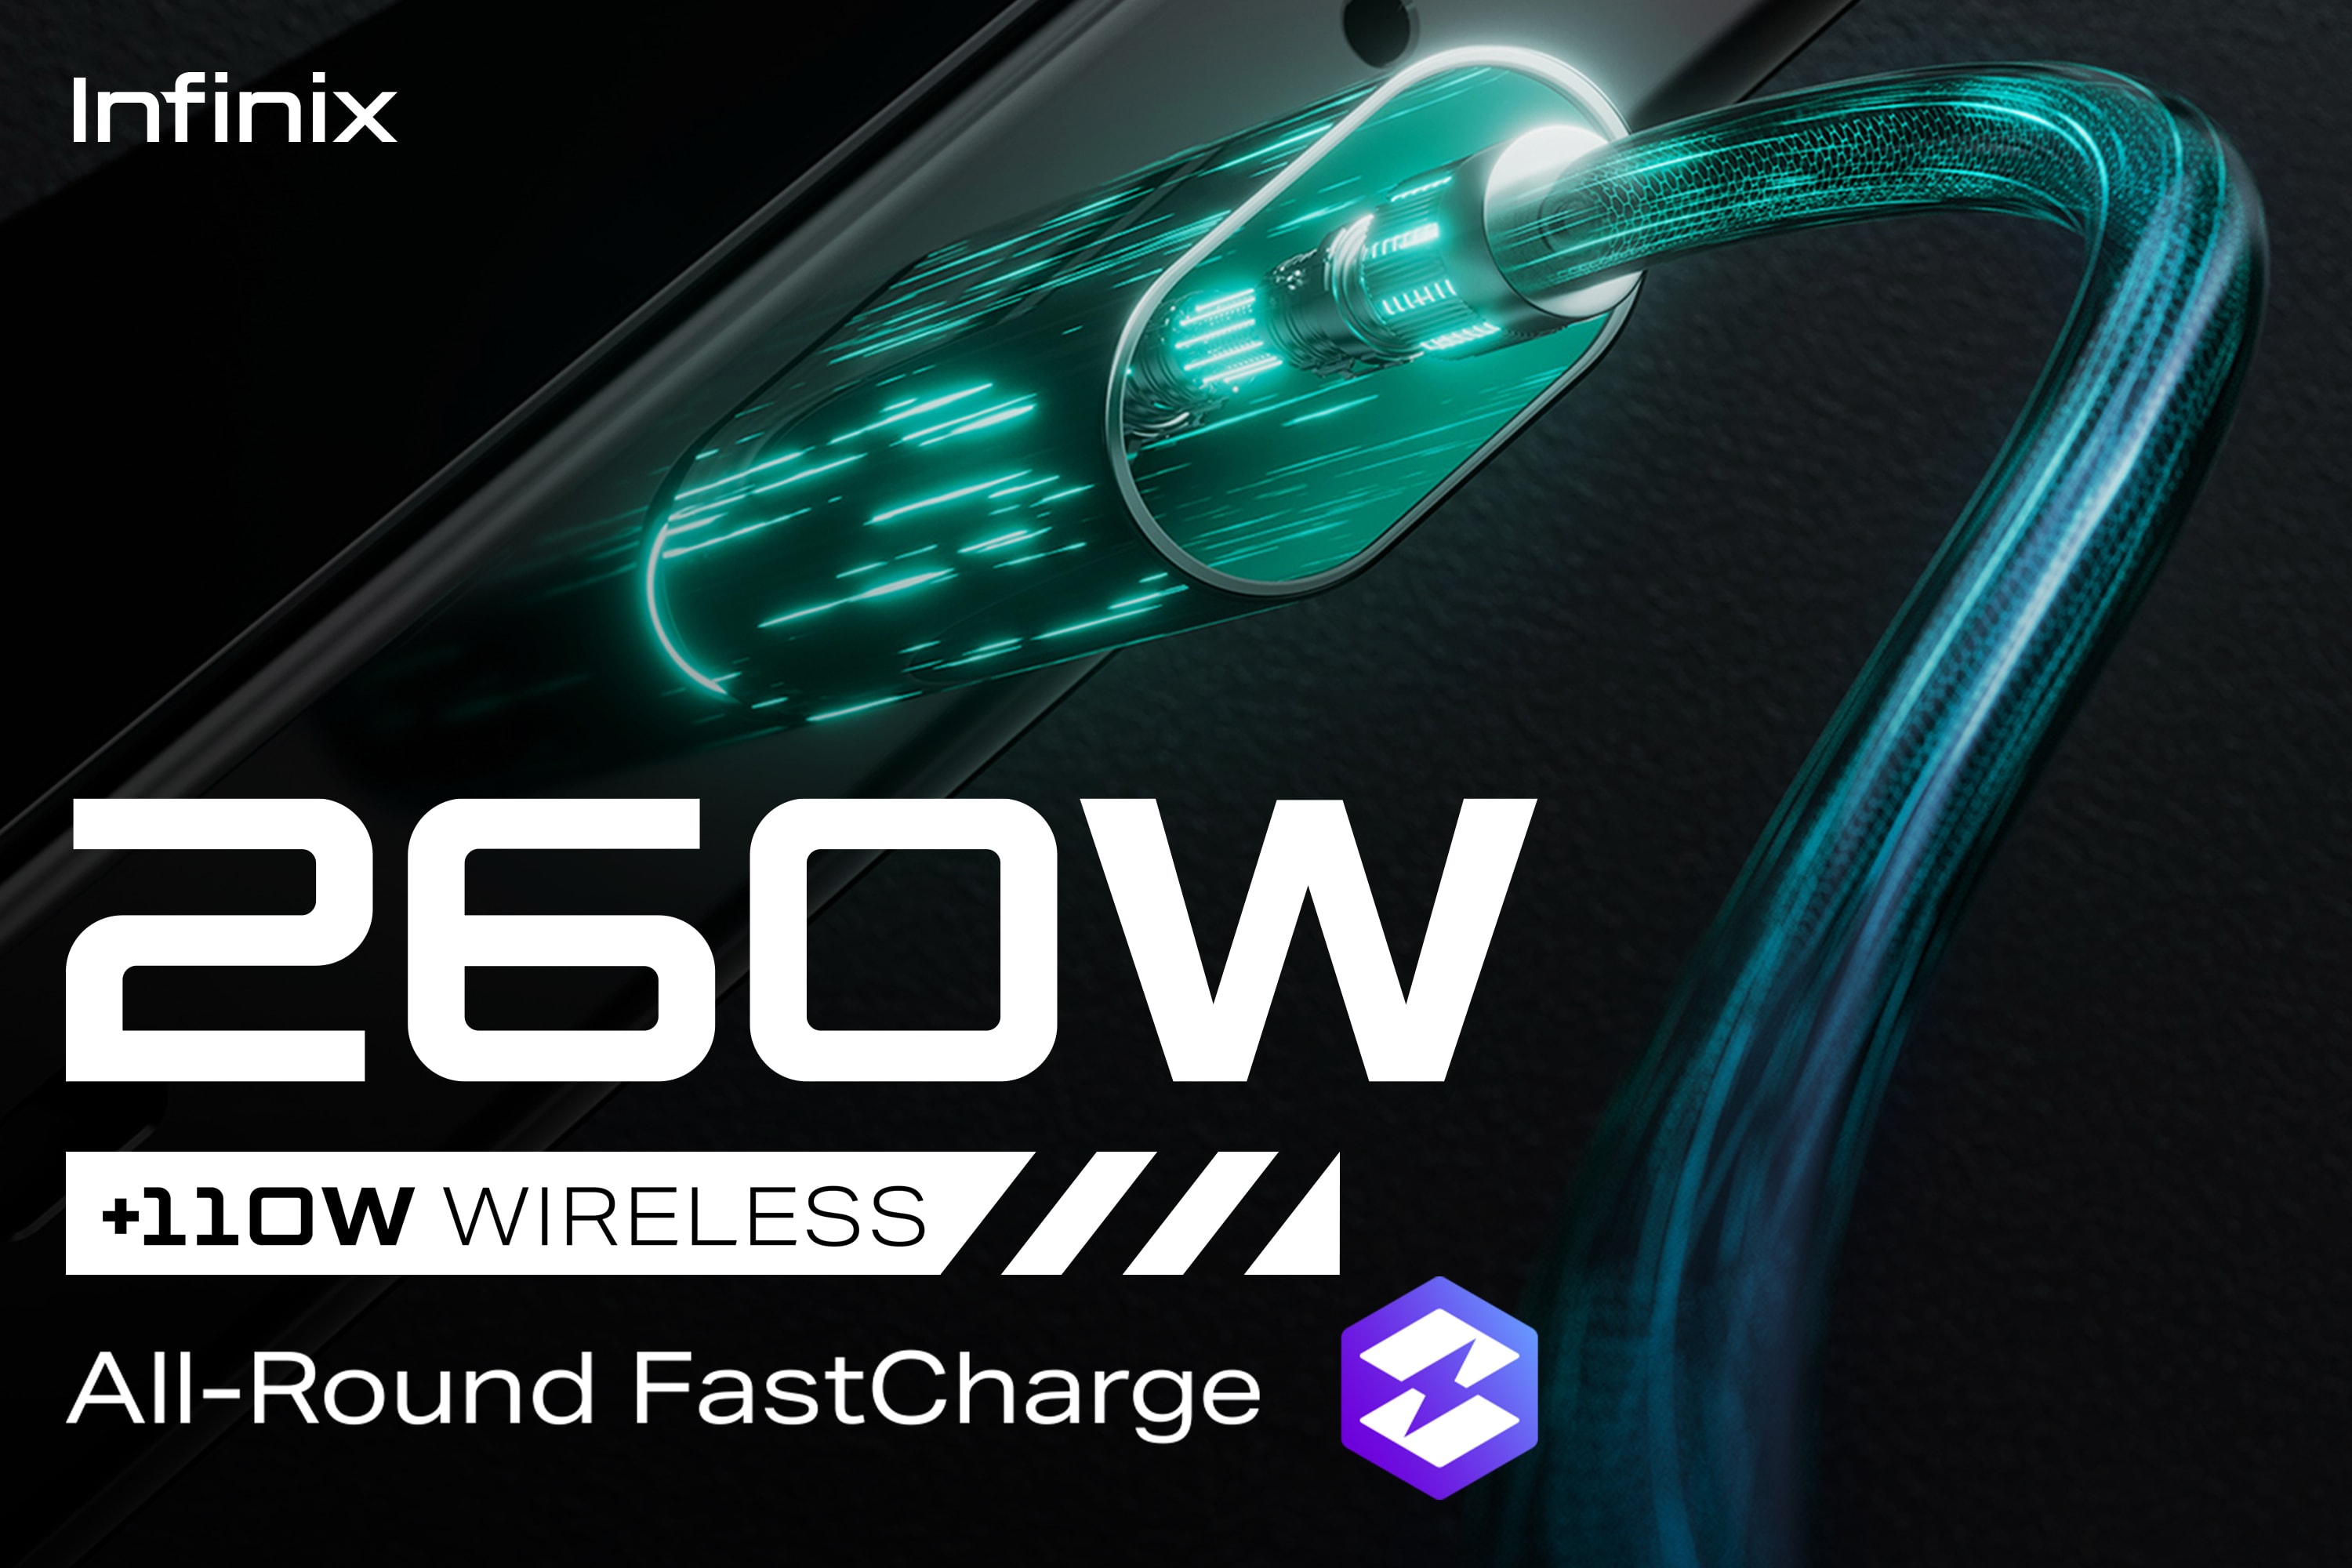 100% in 7.5 Minutes: Infinix Presents 260W Wired & 110W Wireless All-Round FastCharge The benchmark for fast-charging technology today